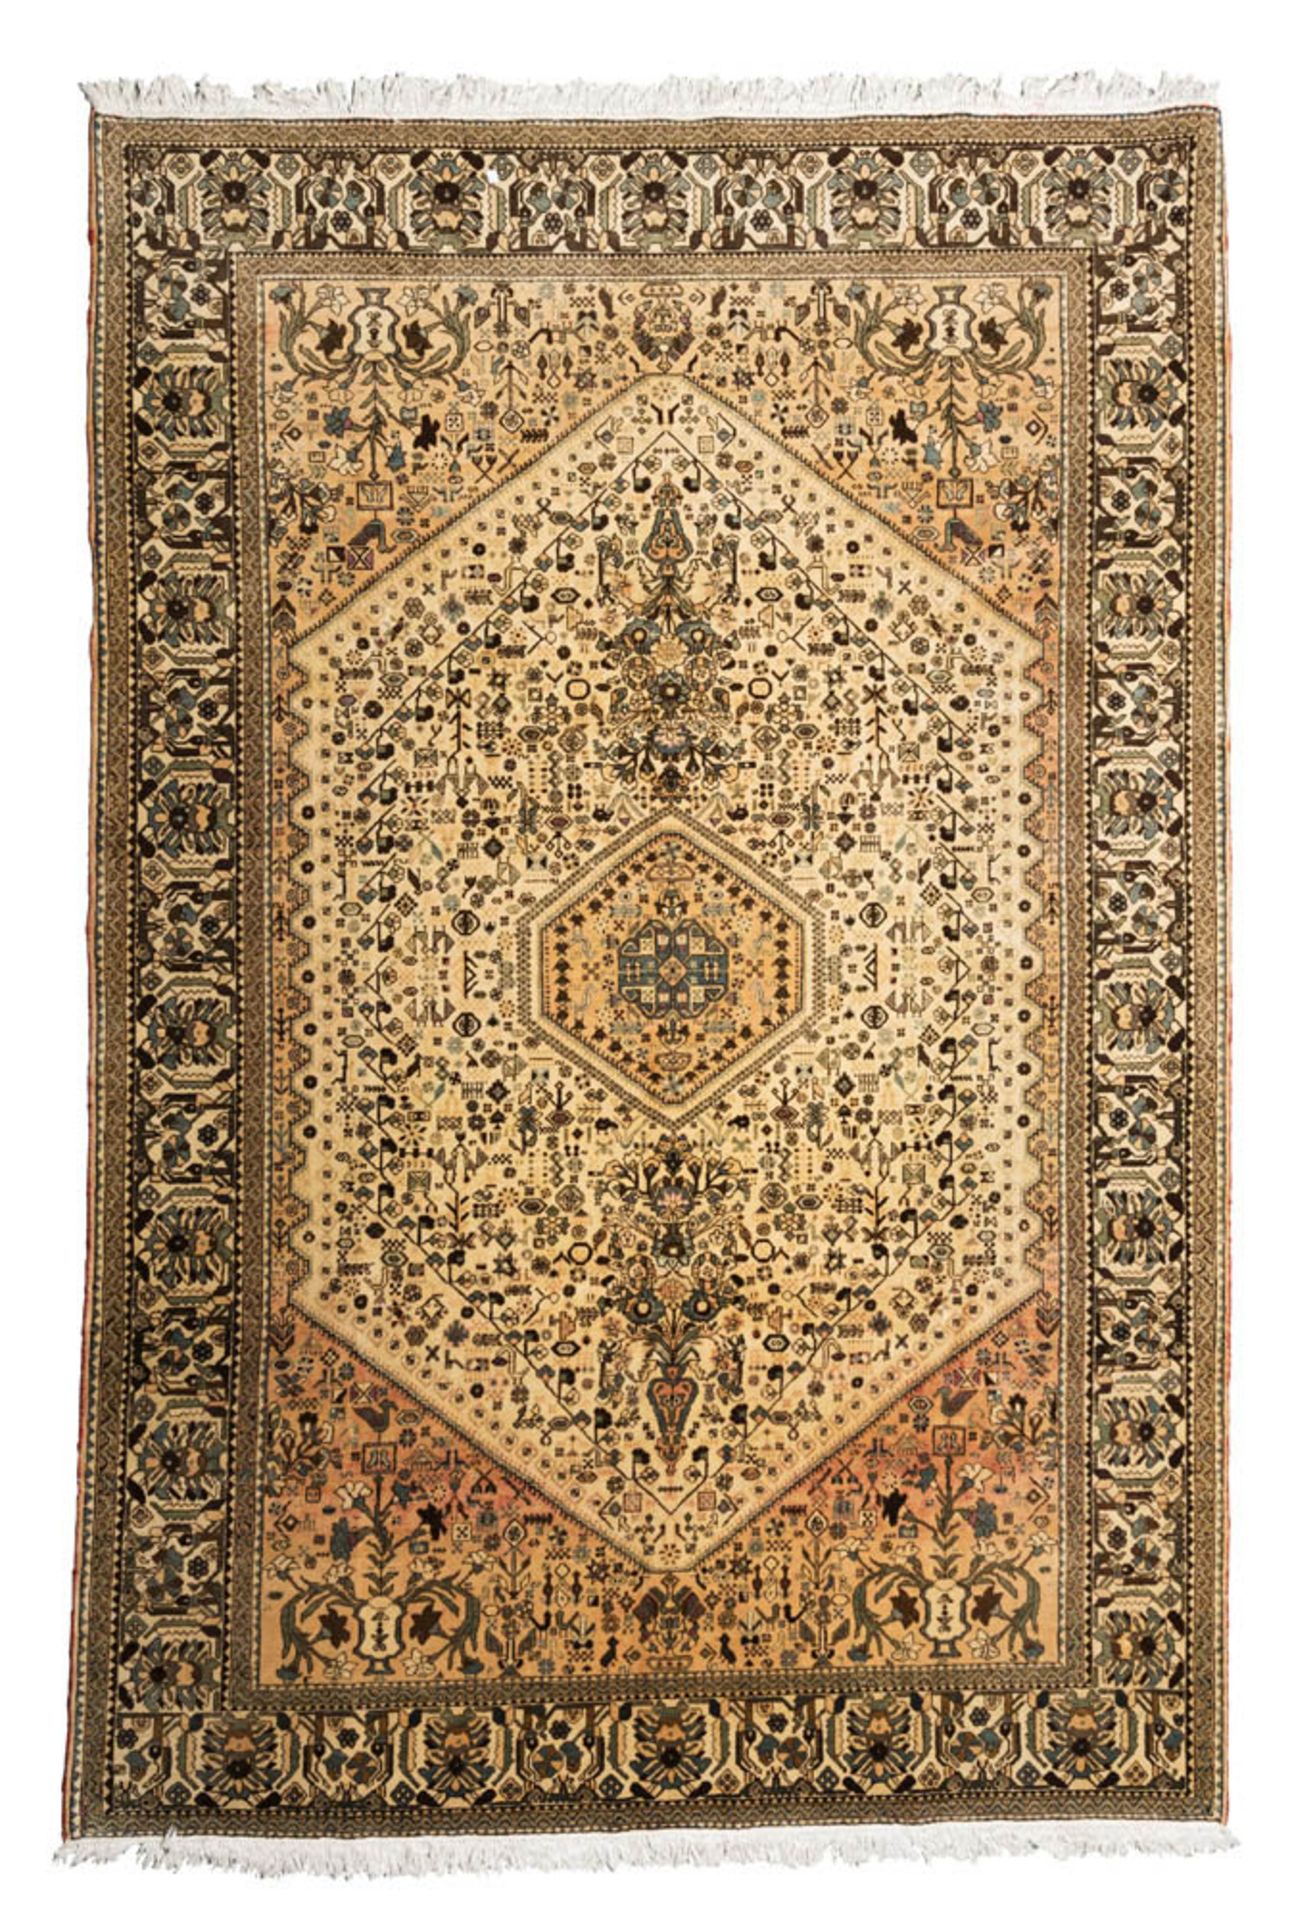 CARPET OF NORTH WESTERN PERSIA, MID-20TH CENTURY rHomboidal medallion and secondary motives of